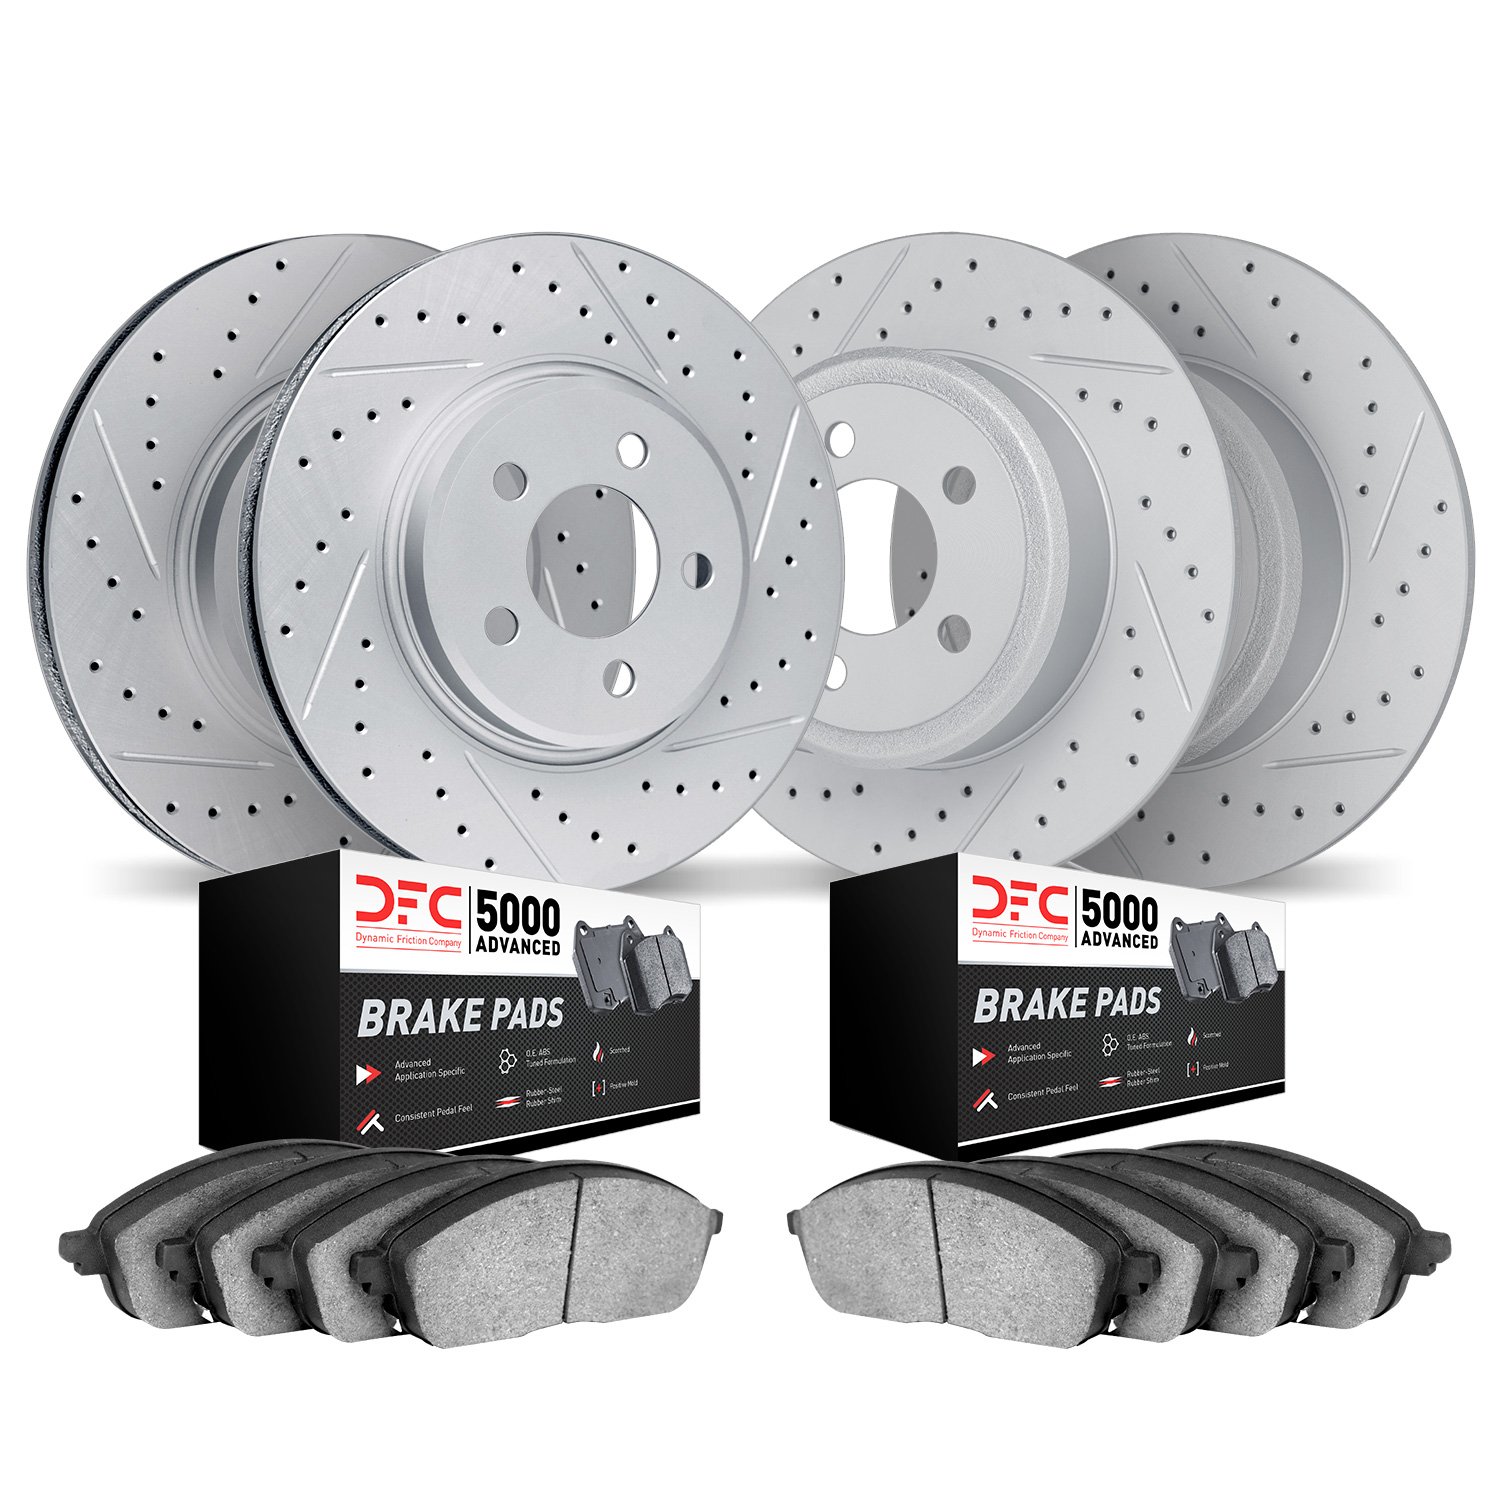 2504-59039 Geoperformance Drilled/Slotted Rotors w/5000 Advanced Brake Pads Kit, 1995-1998 Acura/Honda, Position: Front and Rear